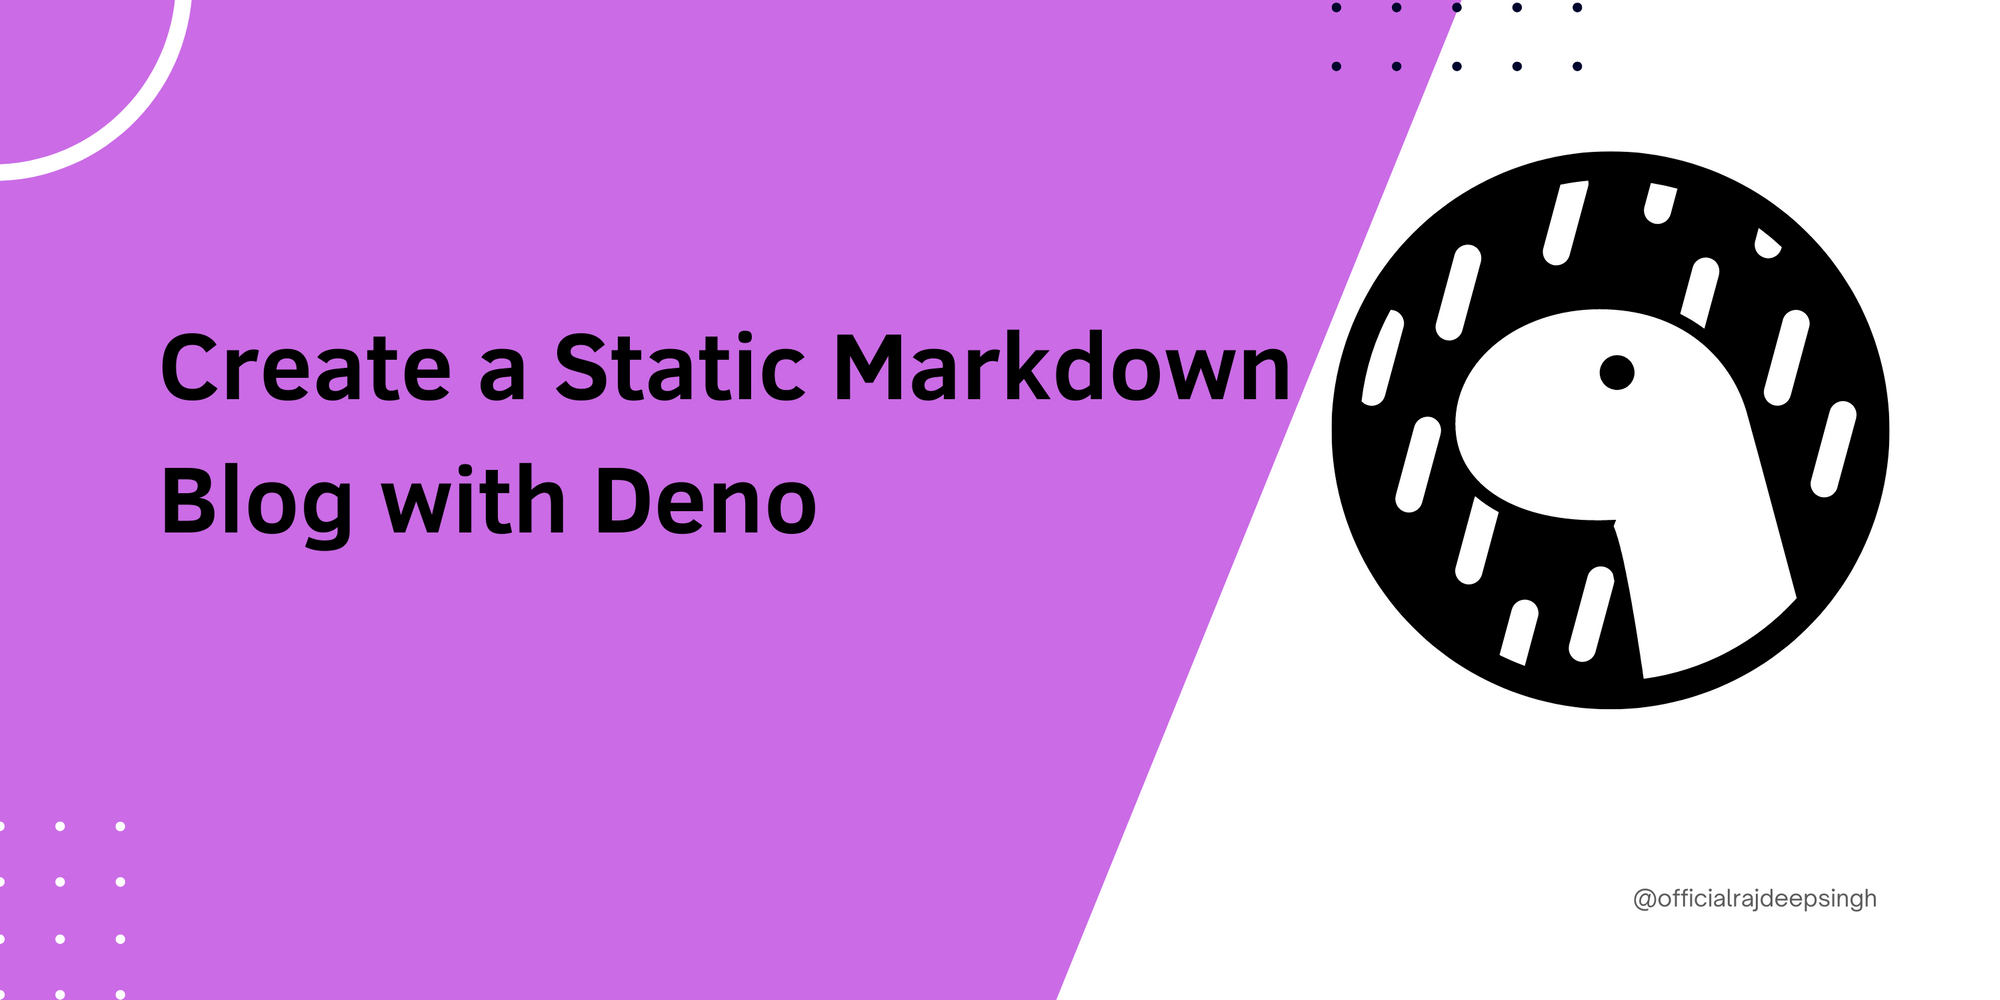 How to Create a Static Markdown Blog with Deno and Deploy It